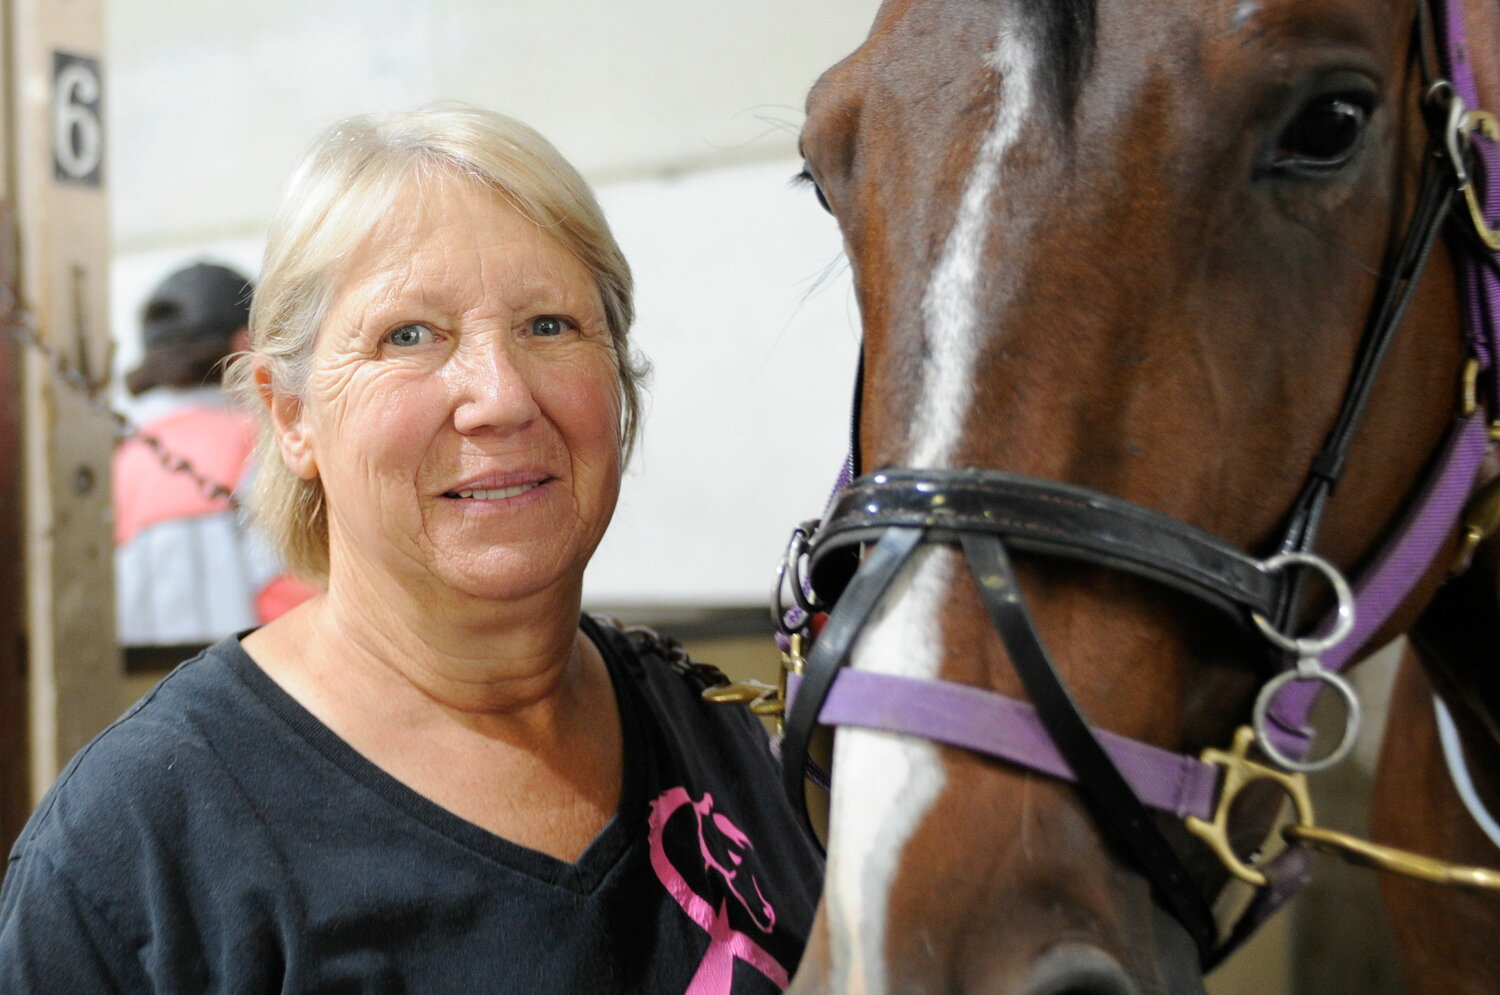 As a driver,  Betsy Phillips once set a track record in 10 days at three different harness tracks: Monticello, Pocono and Yonkers. Today, after decades in harness racing, the pioneer in the sport breeds and trains horses at Monticello Raceway-based Phillips Stables.